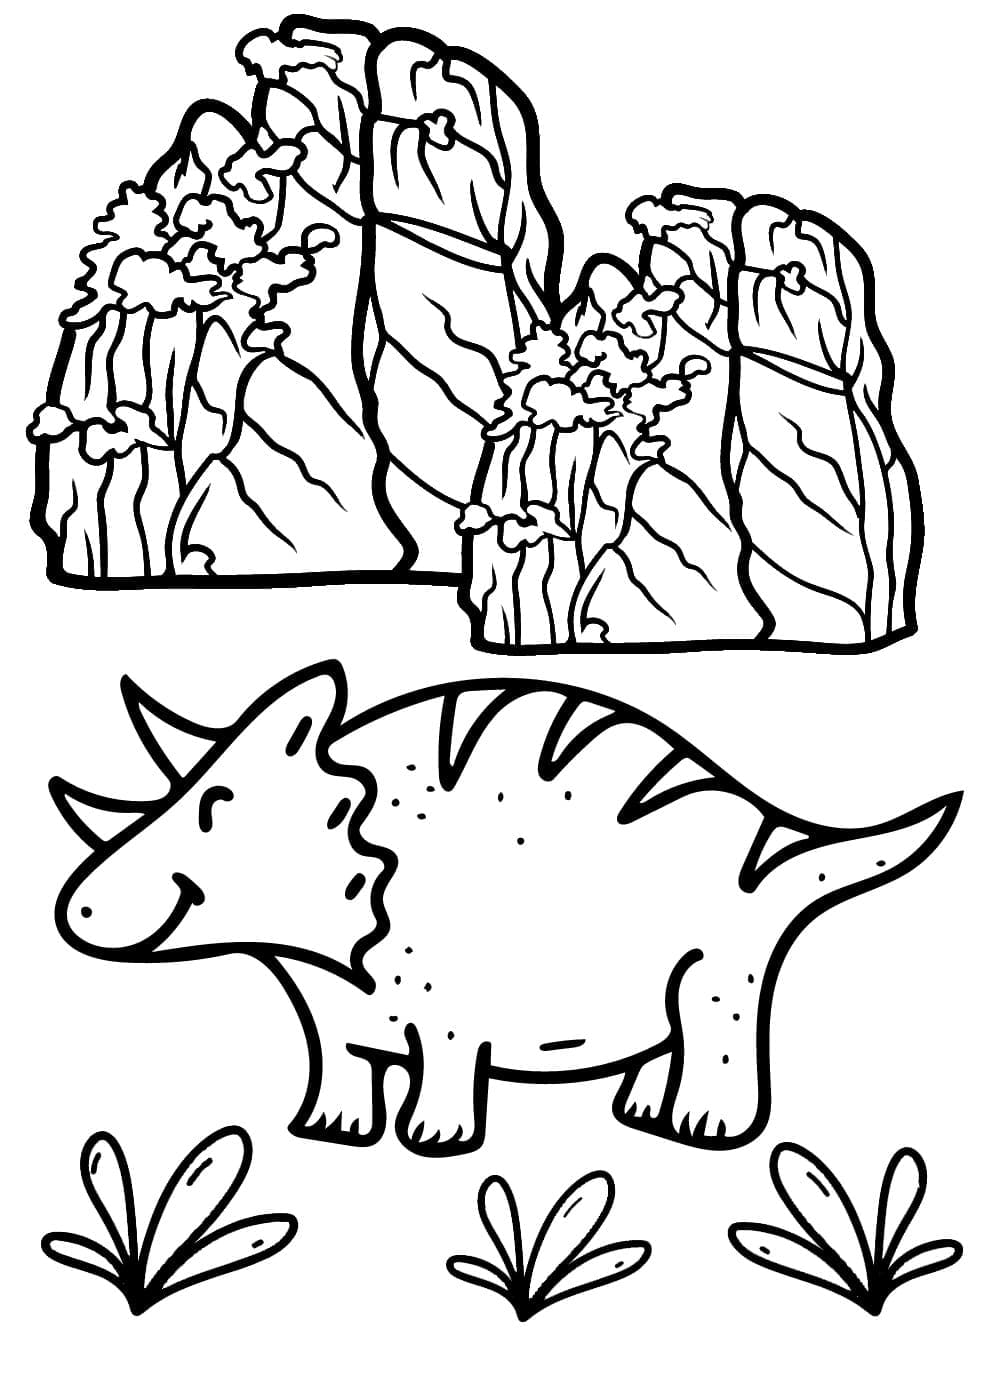 Tricératops Souriant coloring page